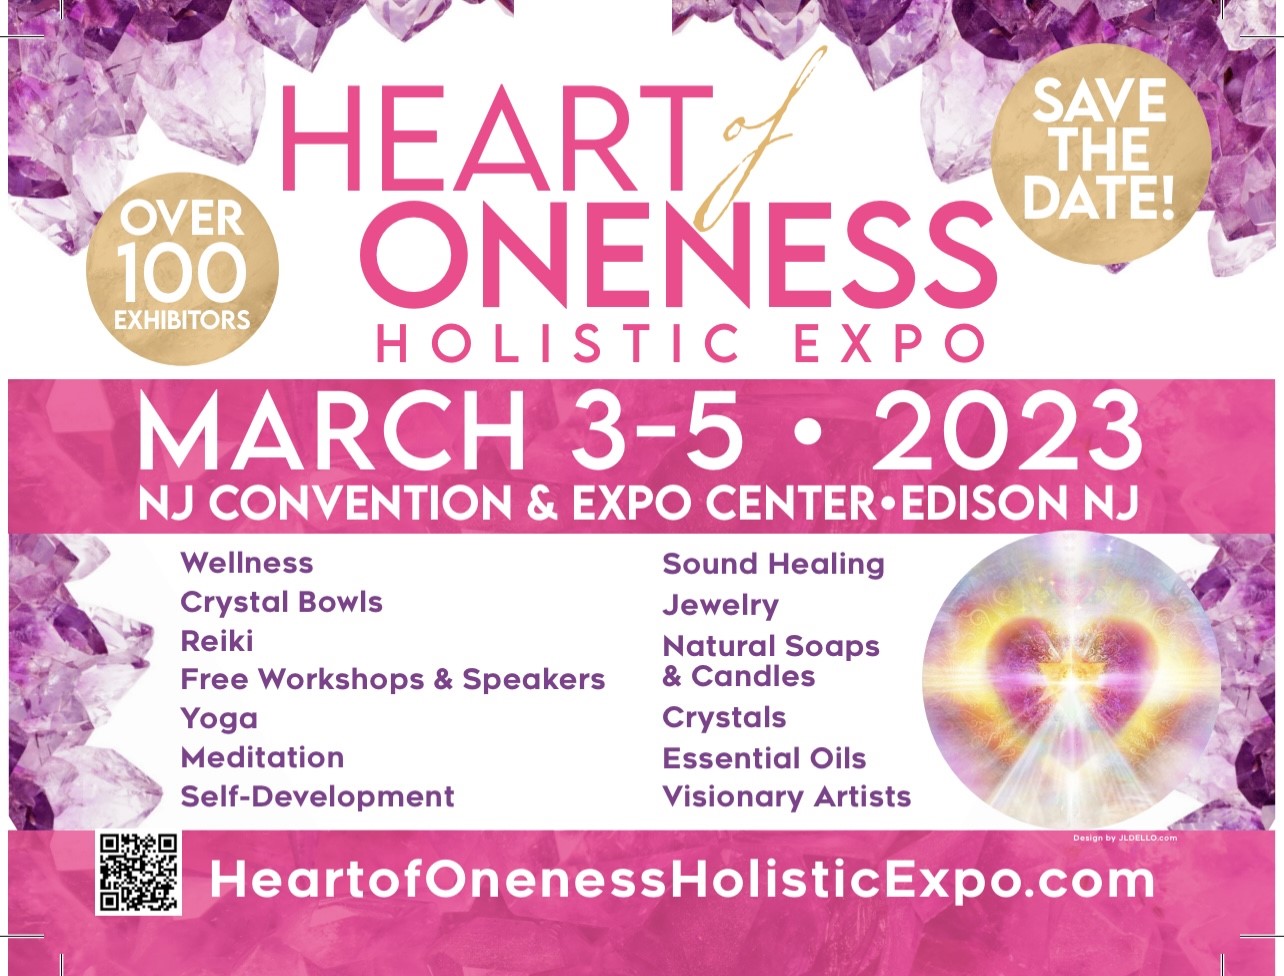 Heart of Oneness Holistic Expo NJ Convention and Exposition Center Edison, BJ